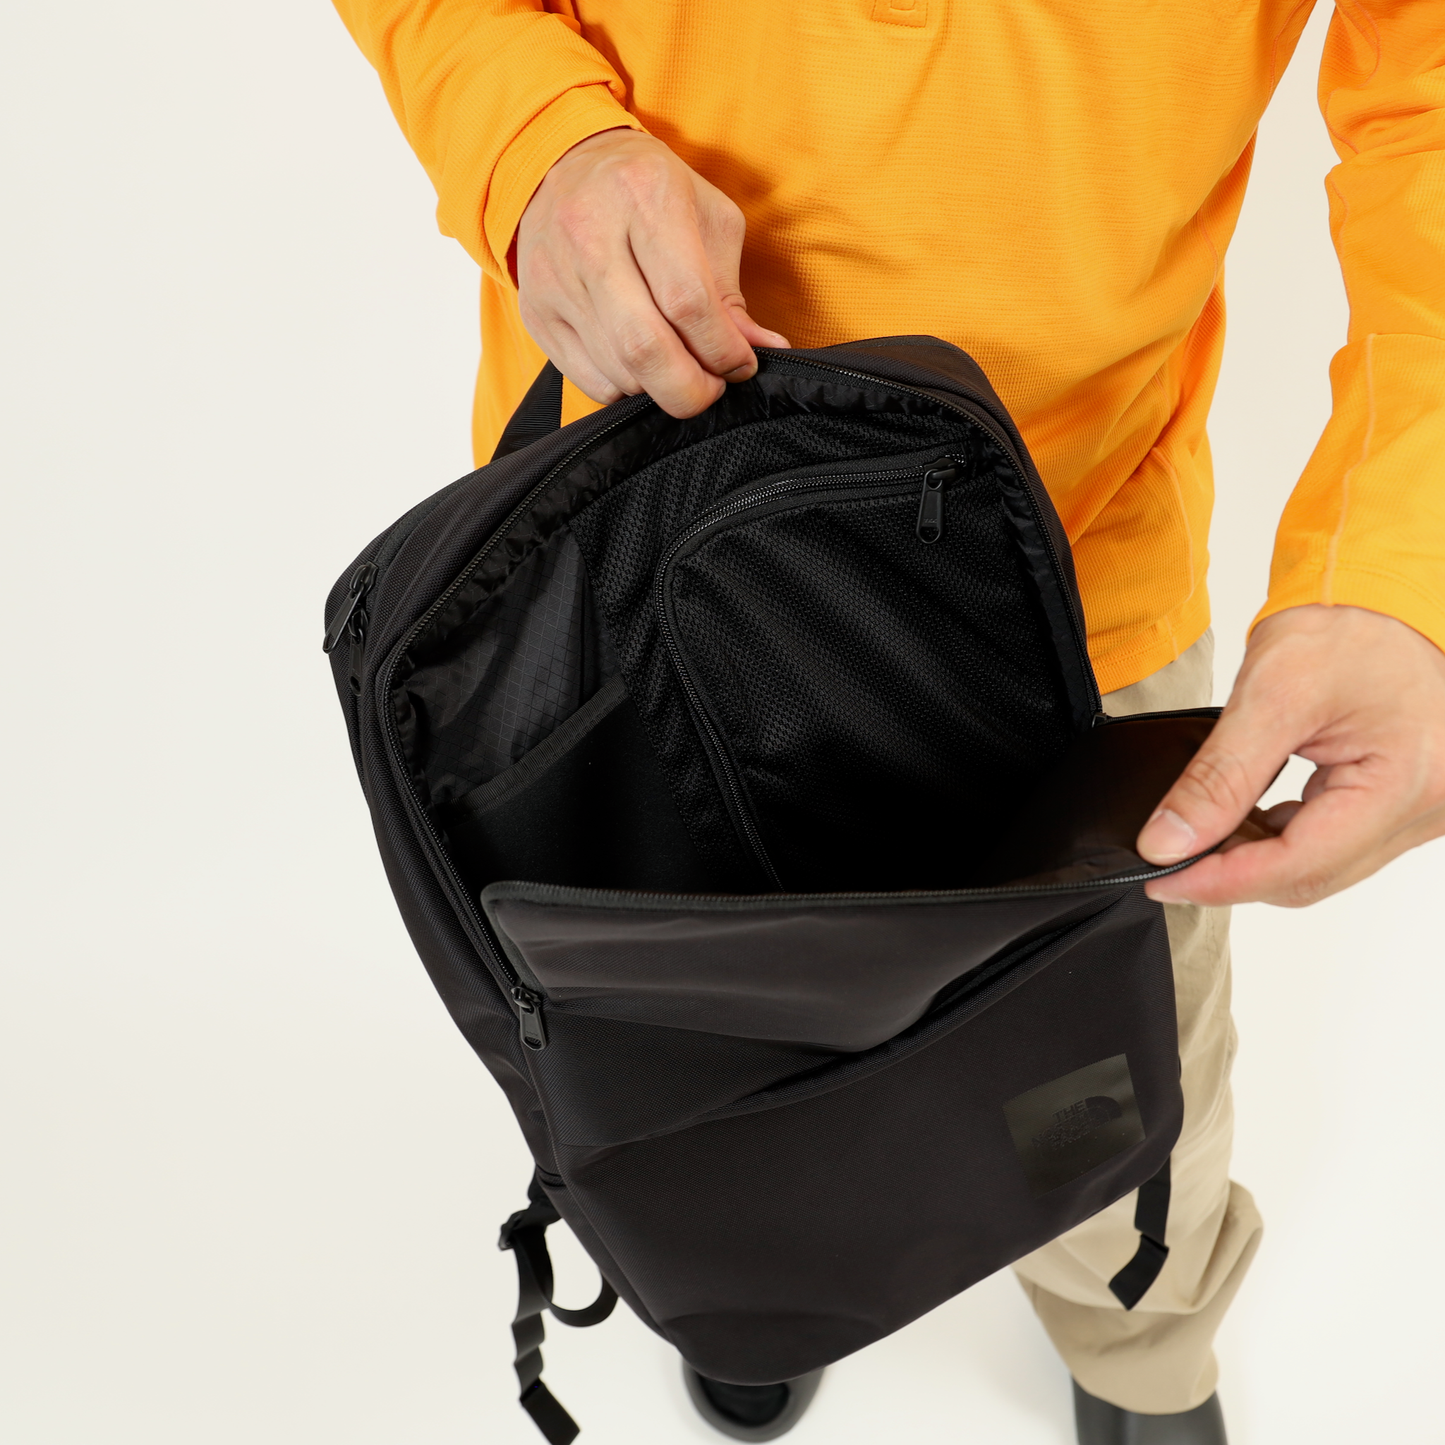 【THE NORTH FACE】Shuttle Daypack Slim